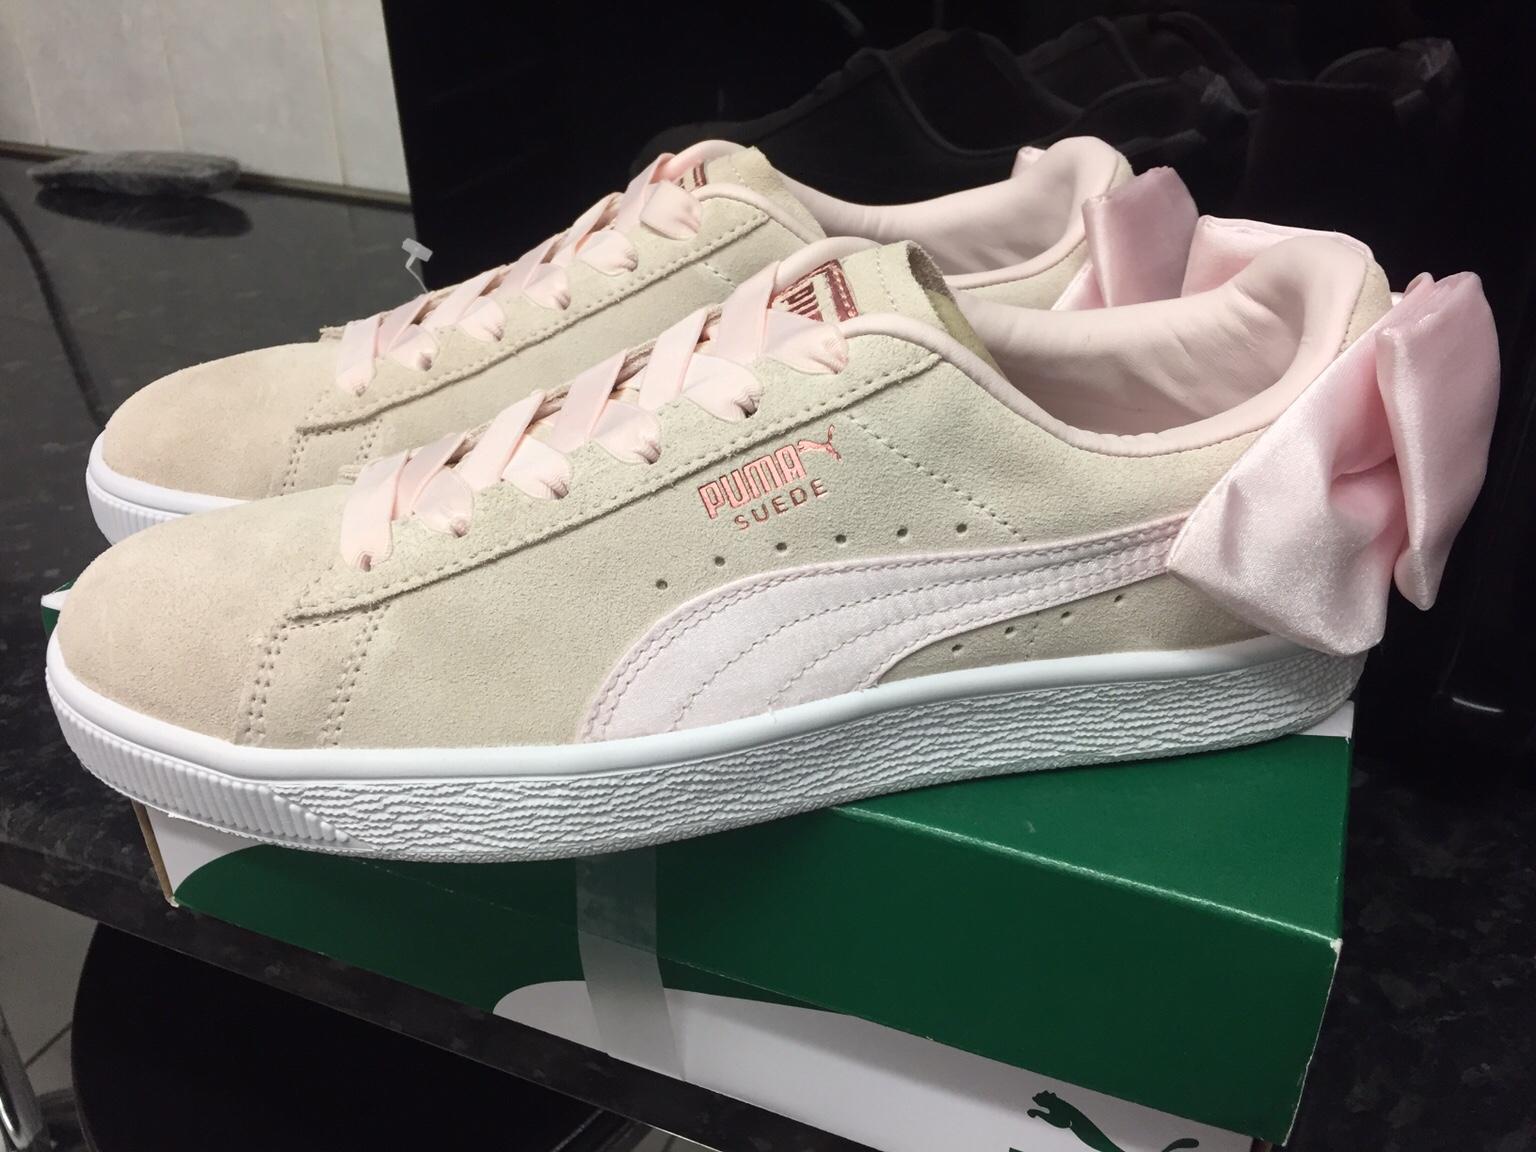 Ladies suede pink Puma trainers in E6 